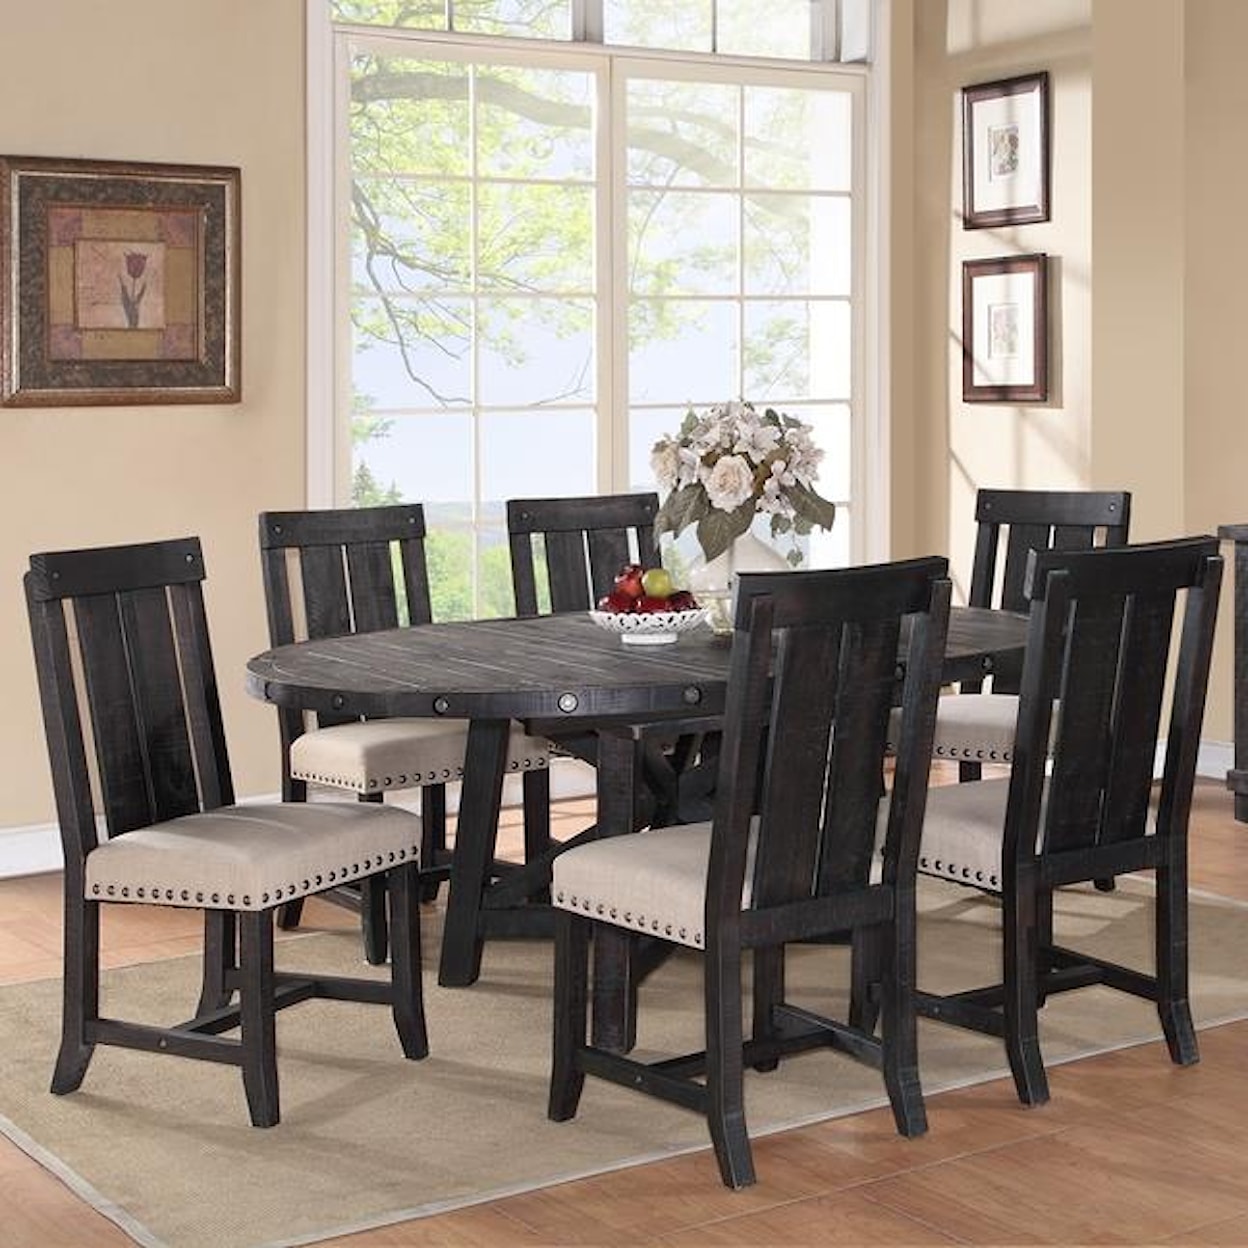 Modus International Yosemite Cafe Dining Table and Chair Set